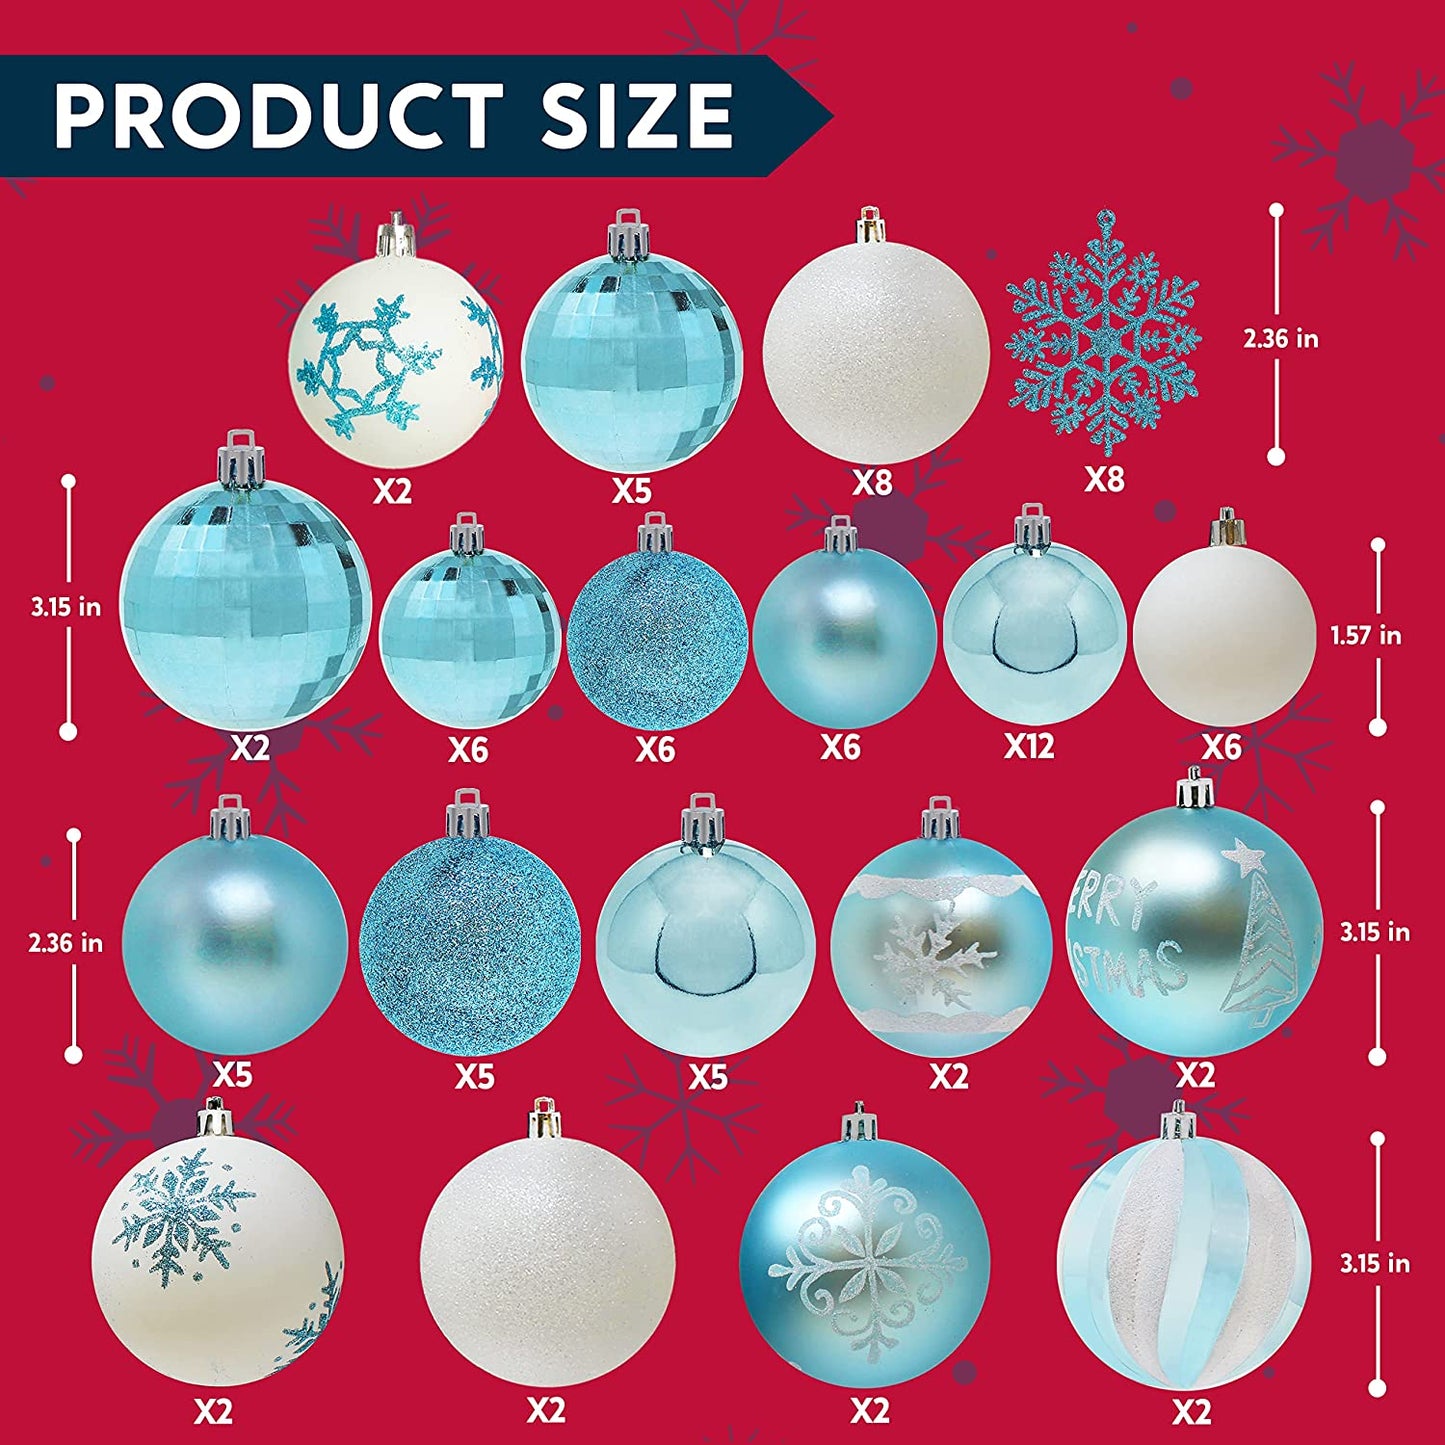 Christmas Ornaments, Blue and White, 88 Pcs